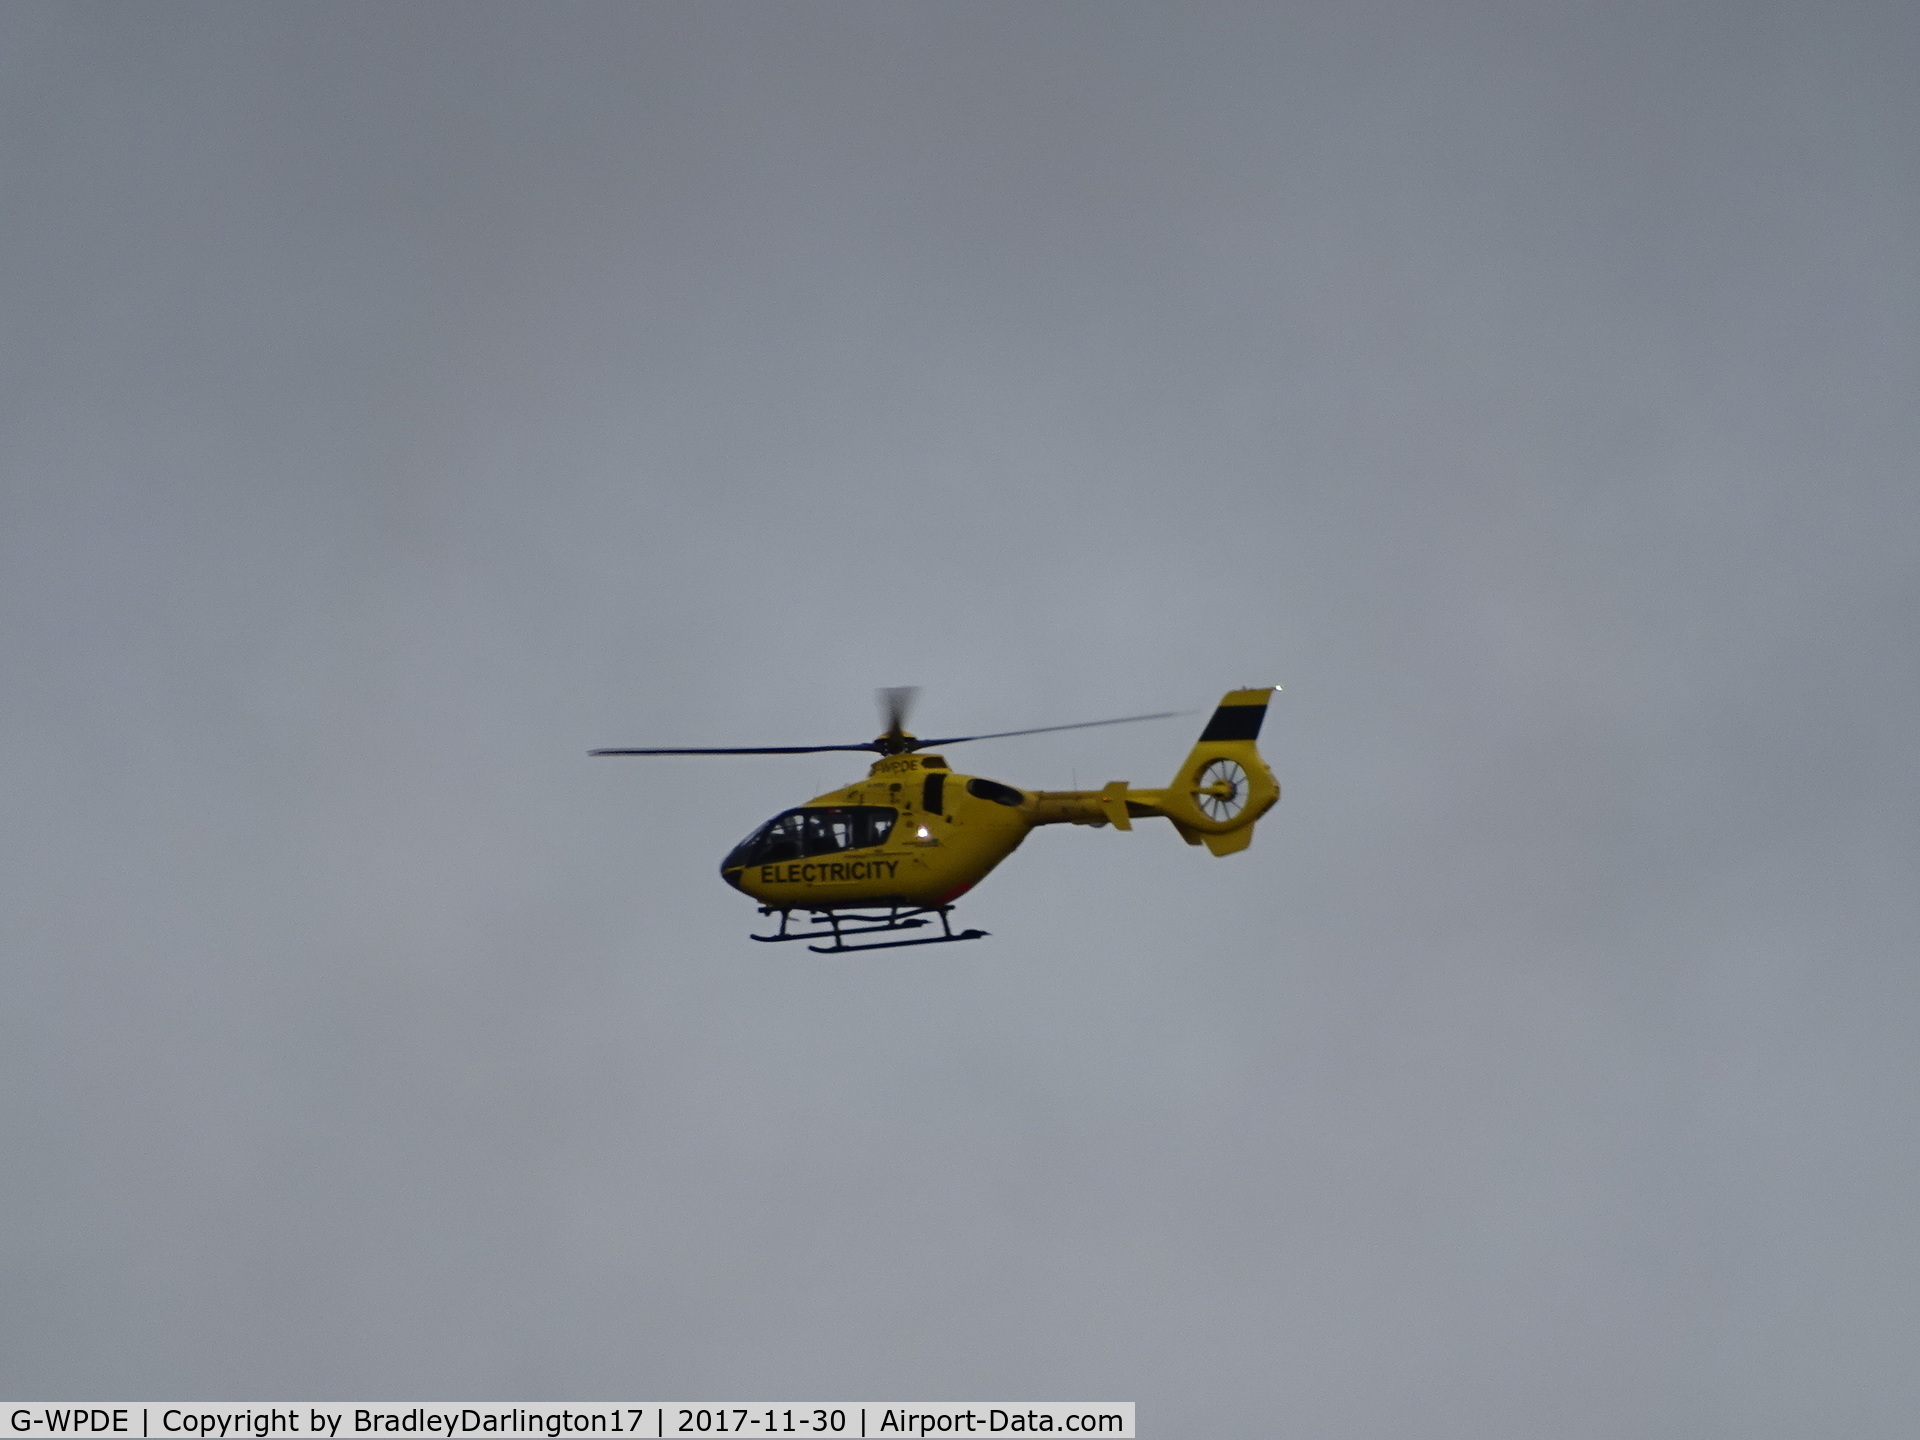 G-WPDE, 2015 Airbus Helicopters EC-135P-2+ C/N 1145, Just Another Shot Of The Heli